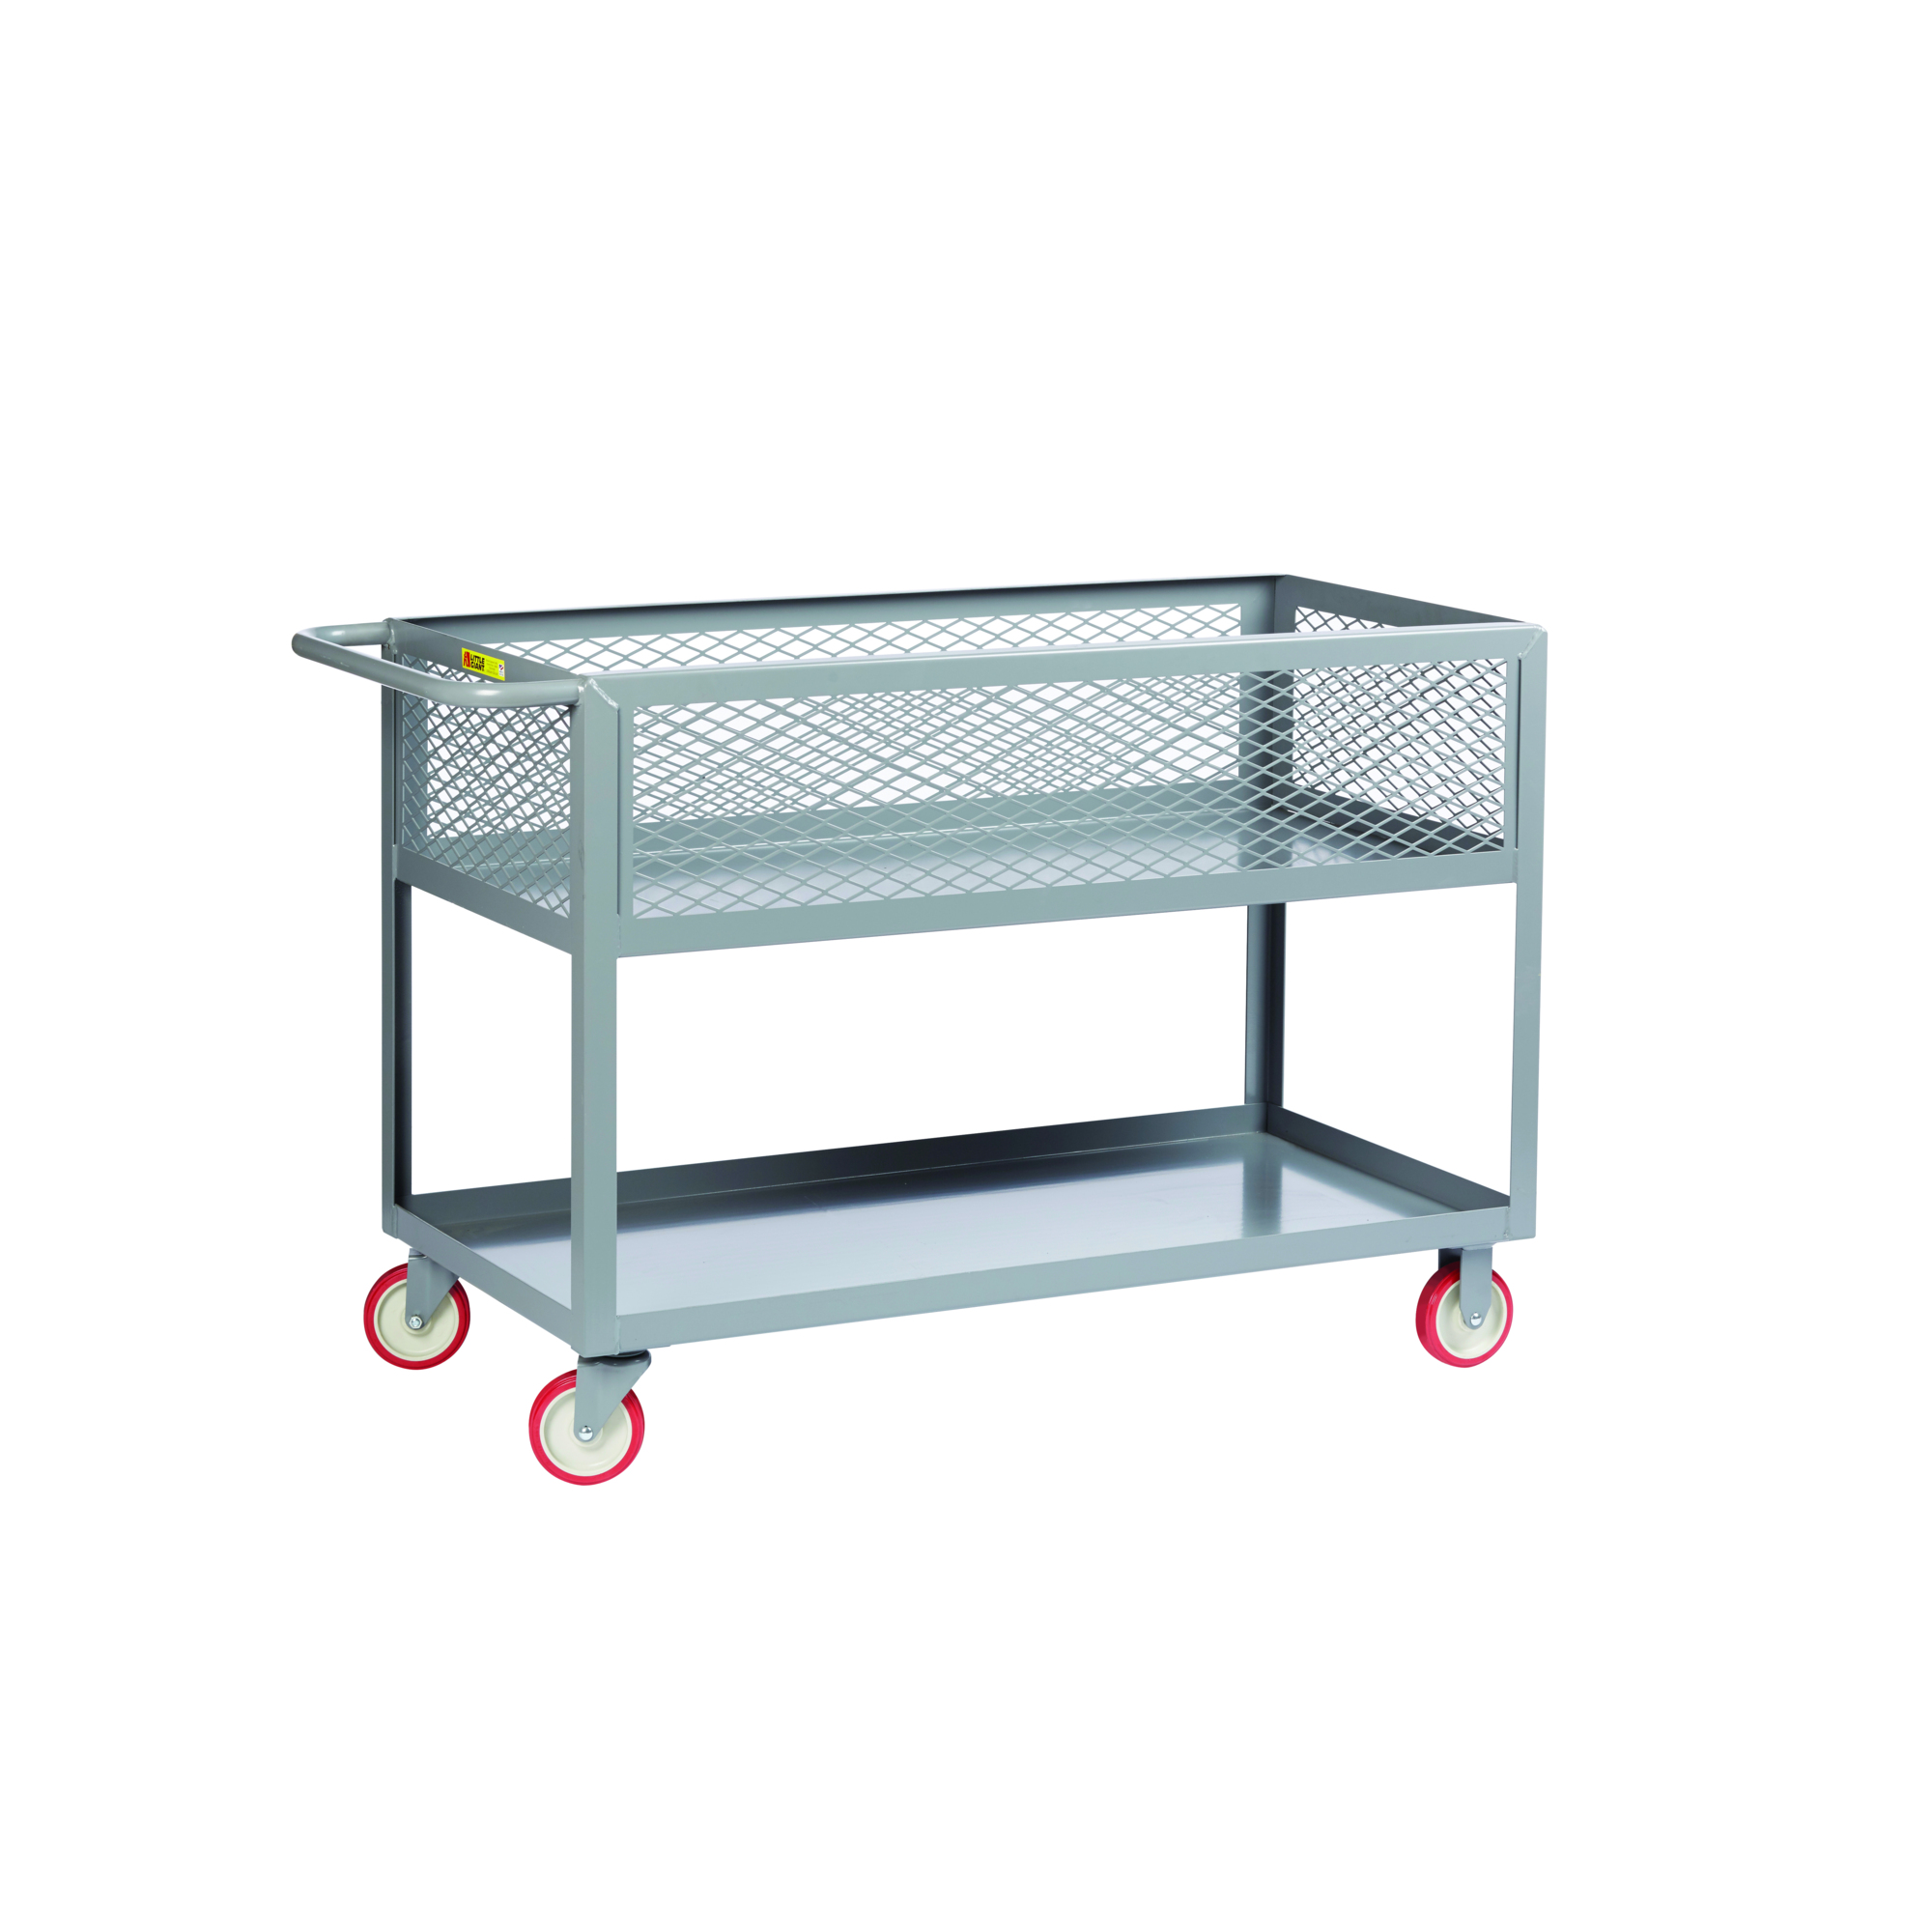 Little Giant, 12Inch Deep Shelf Truck, Mesh Sides, 24x48, 1200 lbs, Total Capacity 1200 lb, Shelves (qty.) 2, Material Carbon Steel, Model DSX-2448-